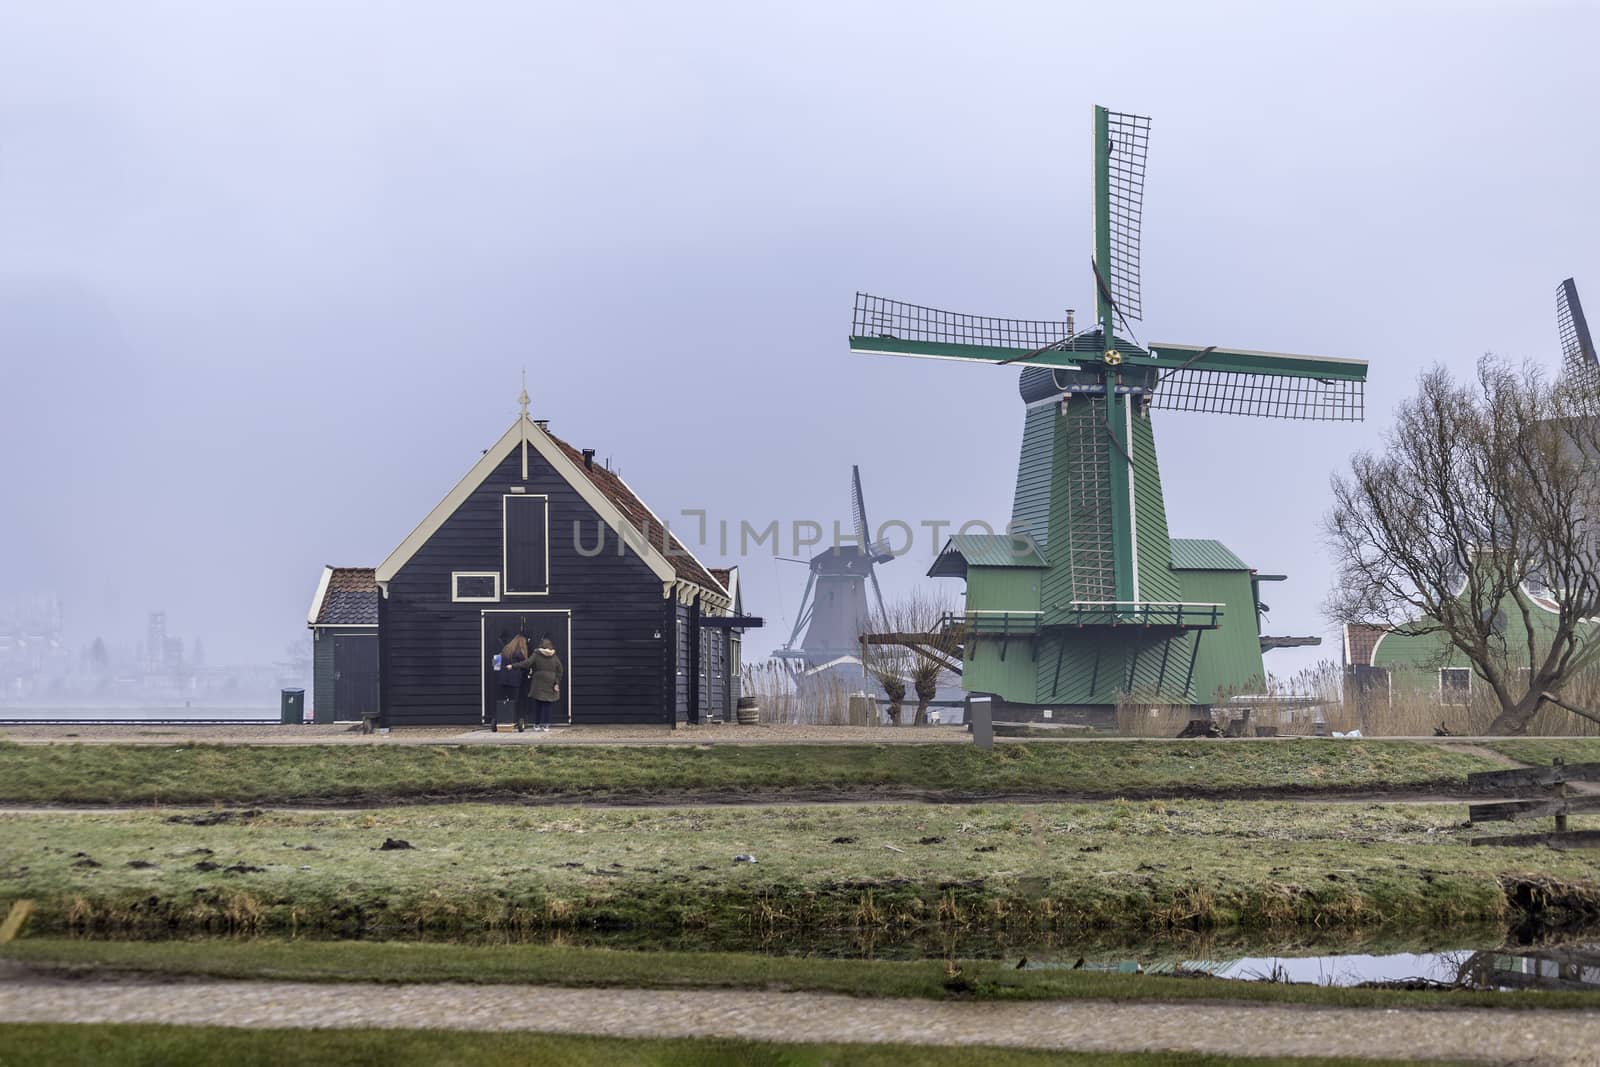 Iconic view of Dutch green sawmill and house standing on the edge of the calm canals at the Zaanse Schans early morning, Netherlands